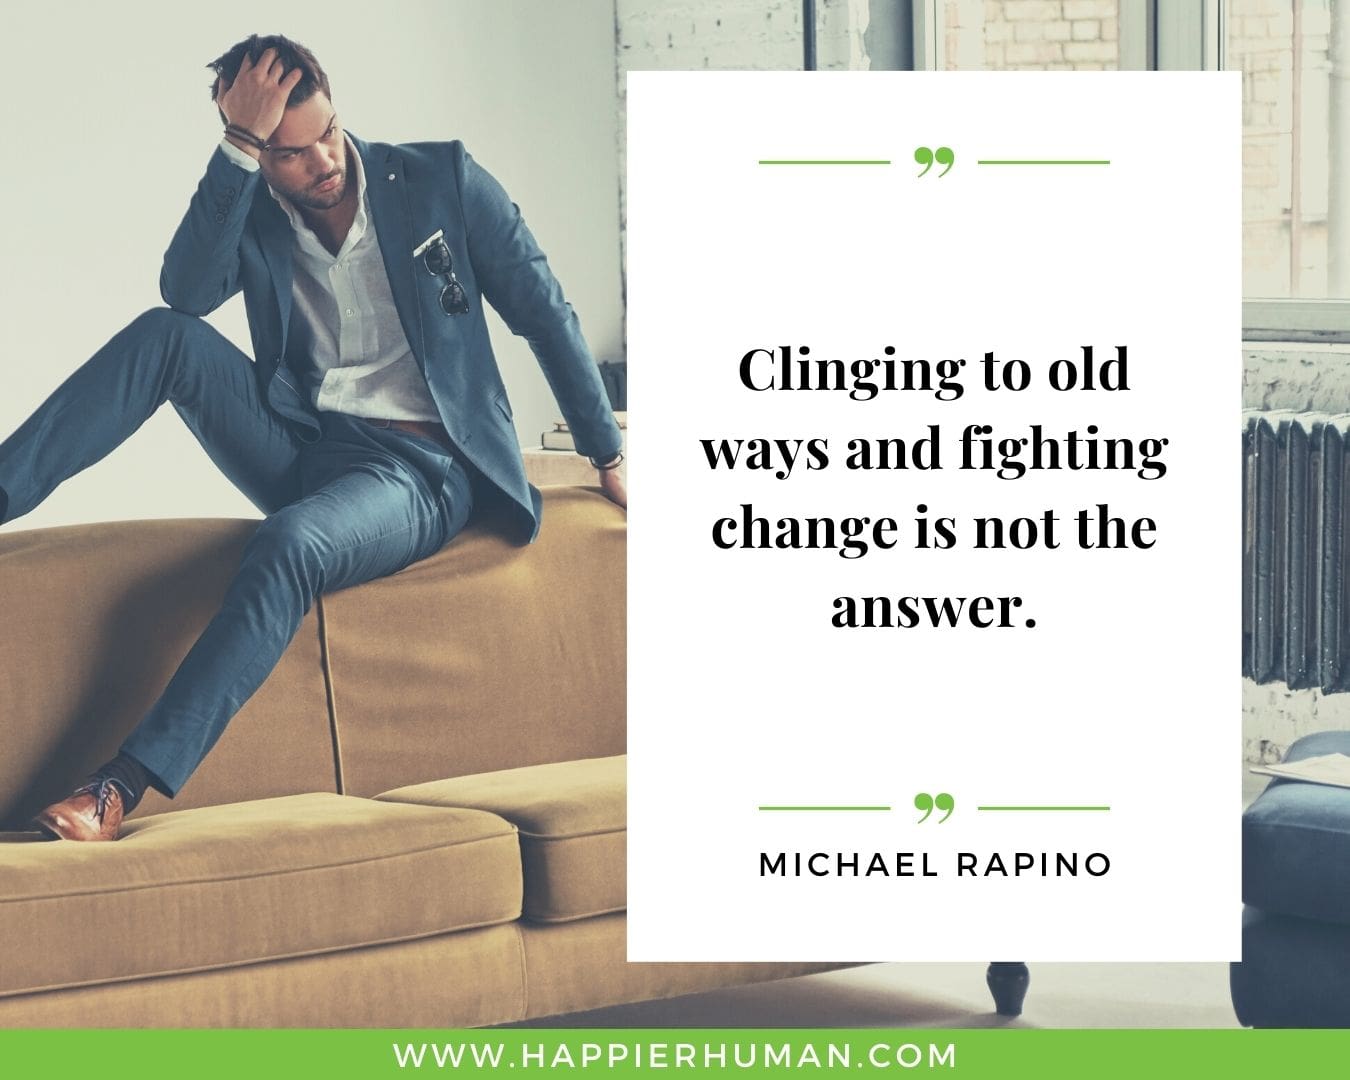 Overthinking Quotes - "Clinging to old ways and fighting change is not the answer." - Michael Rapino